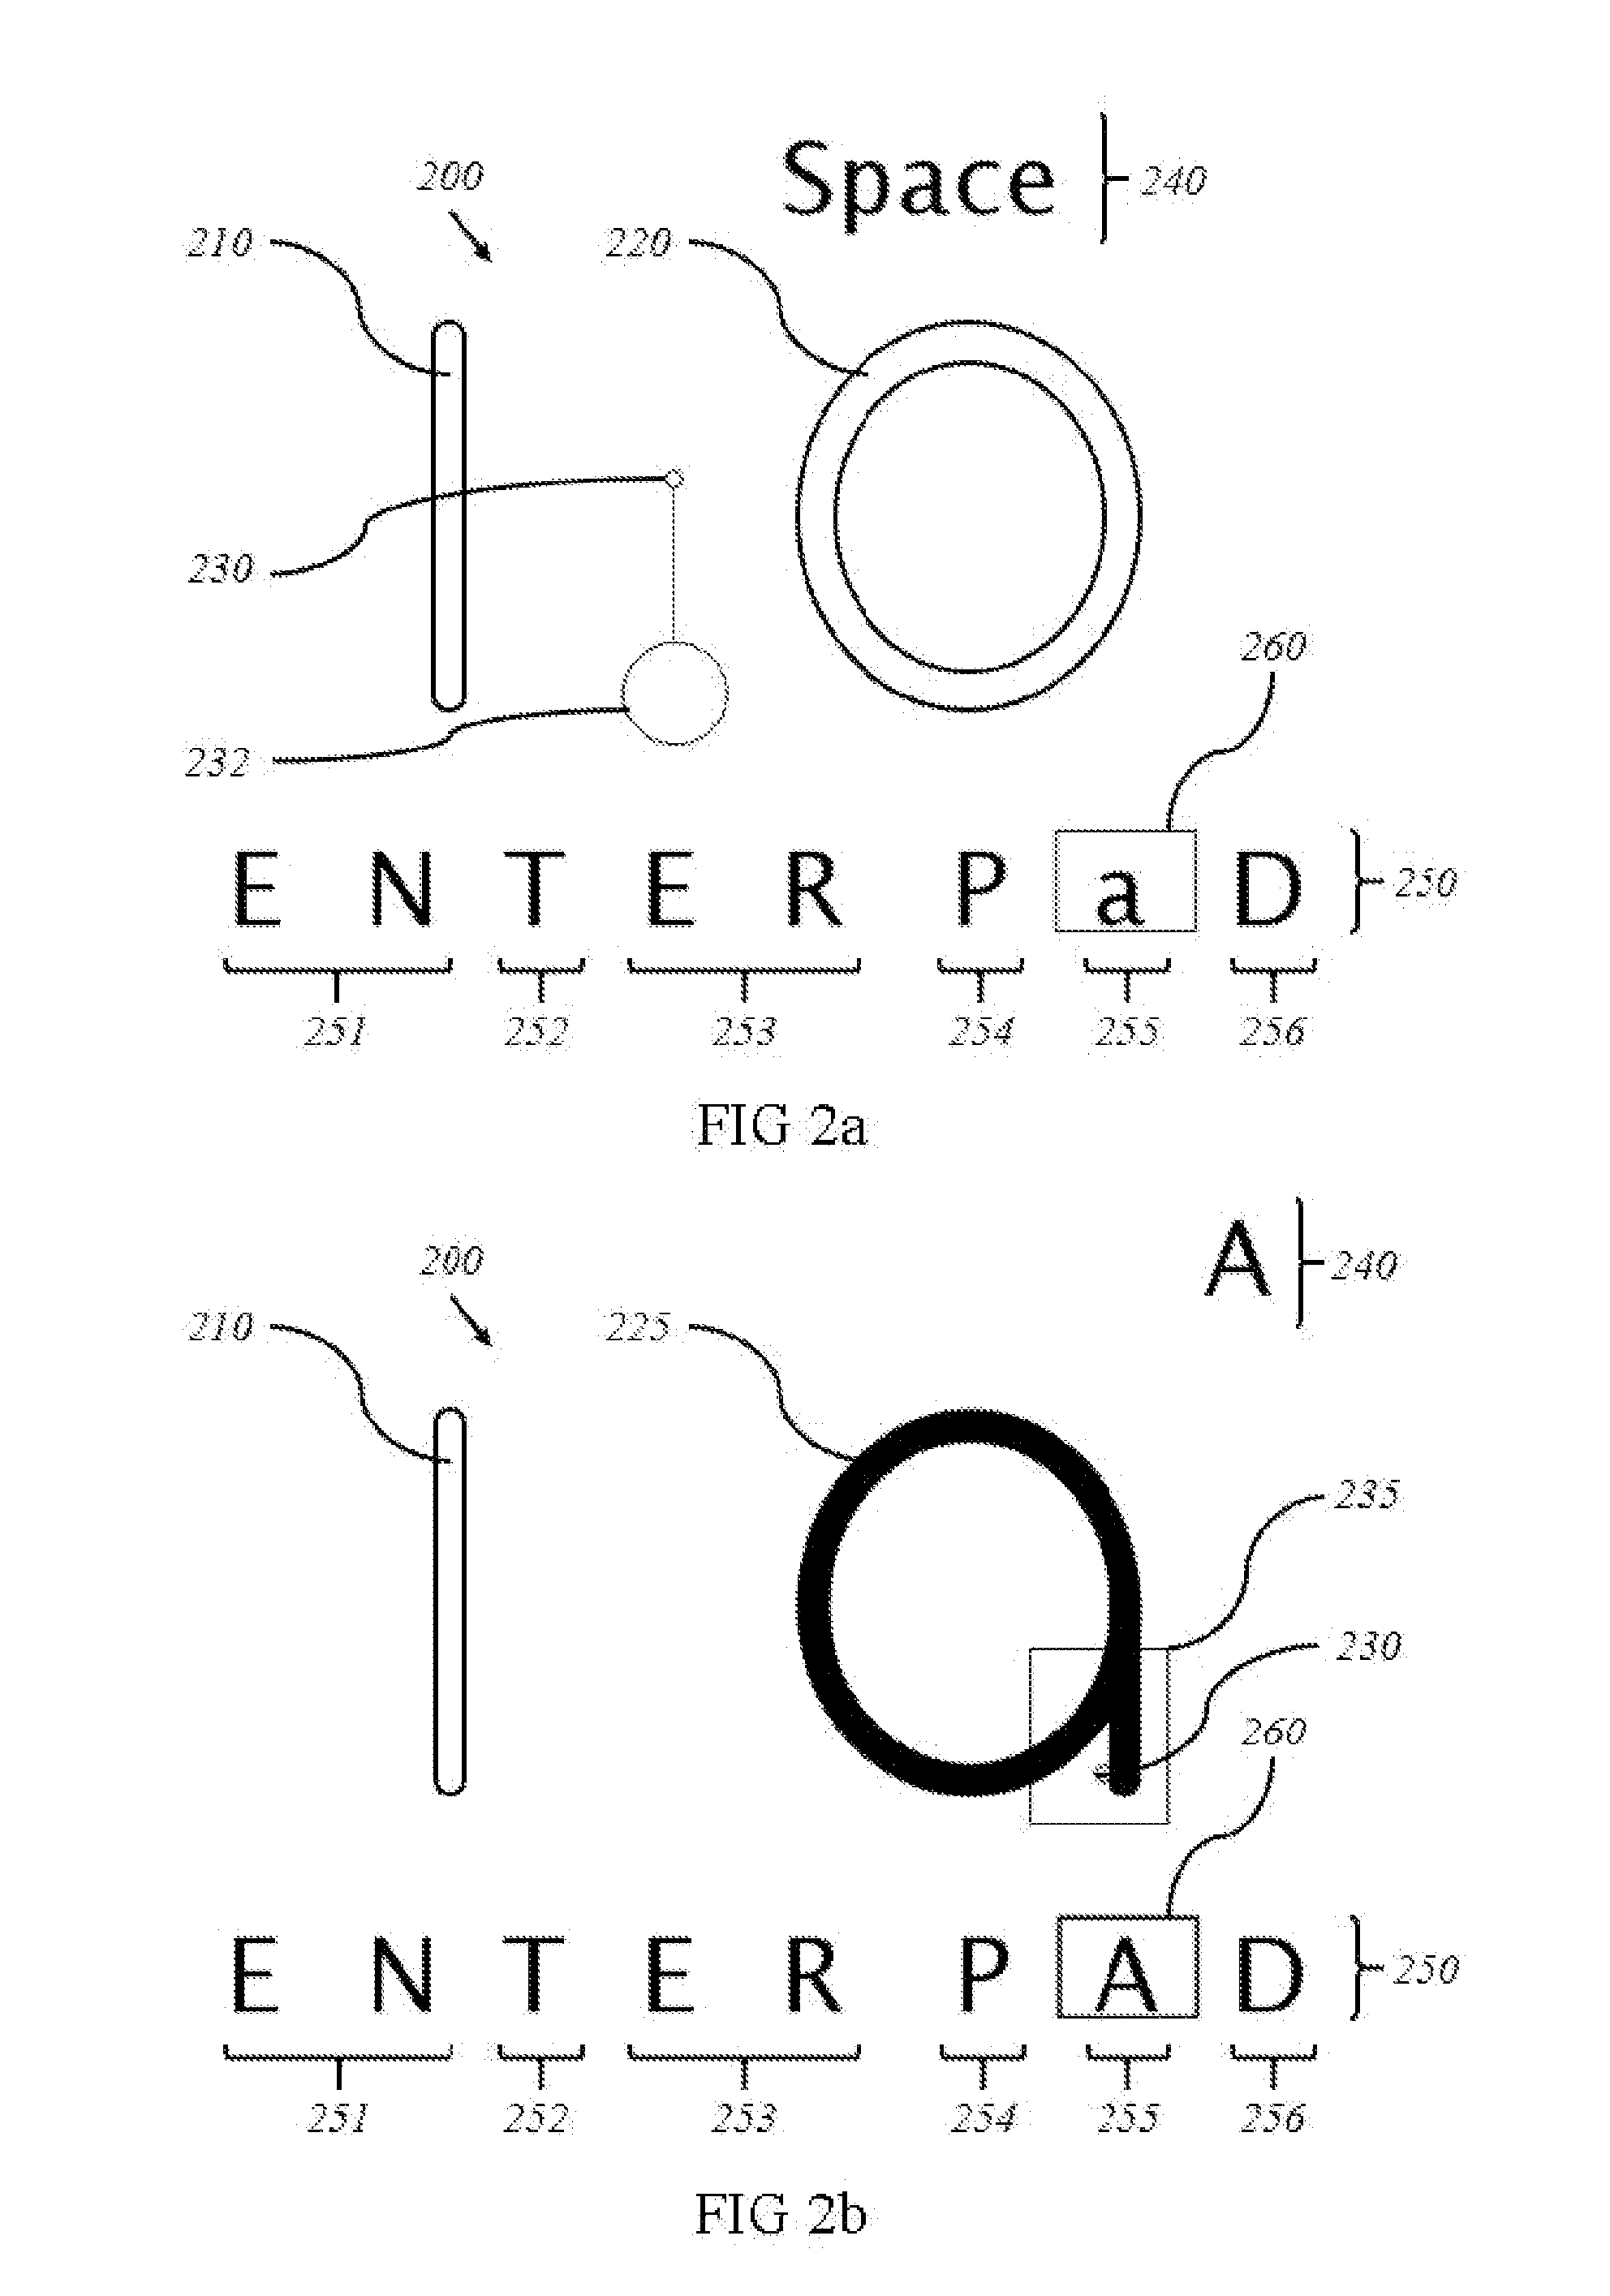 Method and system of data entry on a virtual interface